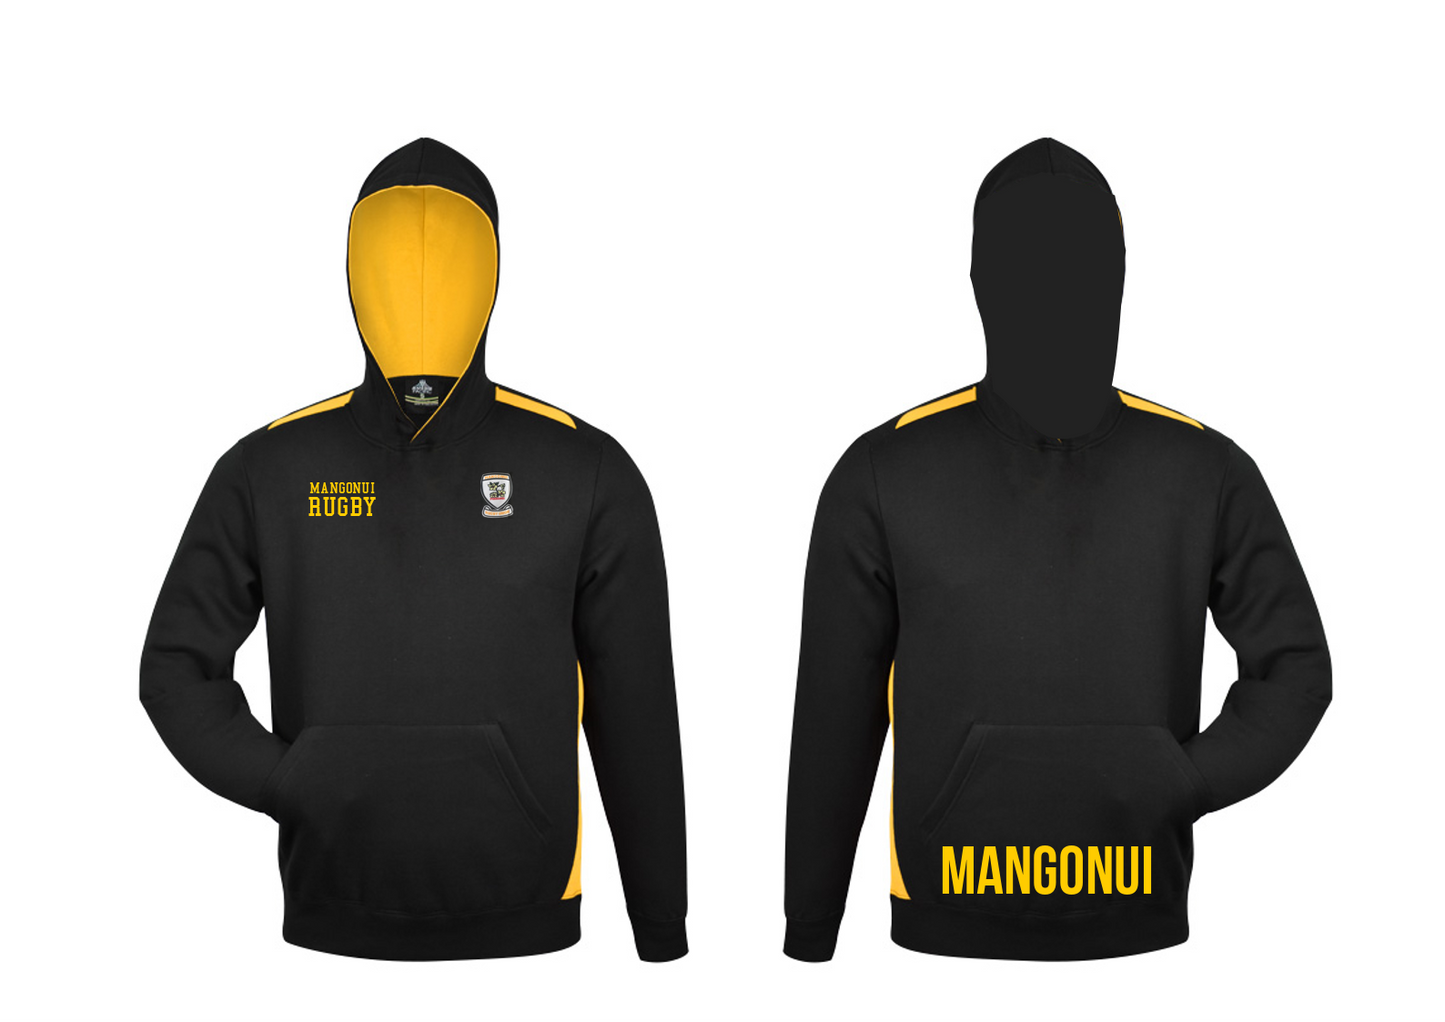 ADULT Mangonui Rugby Supporters Hoodies